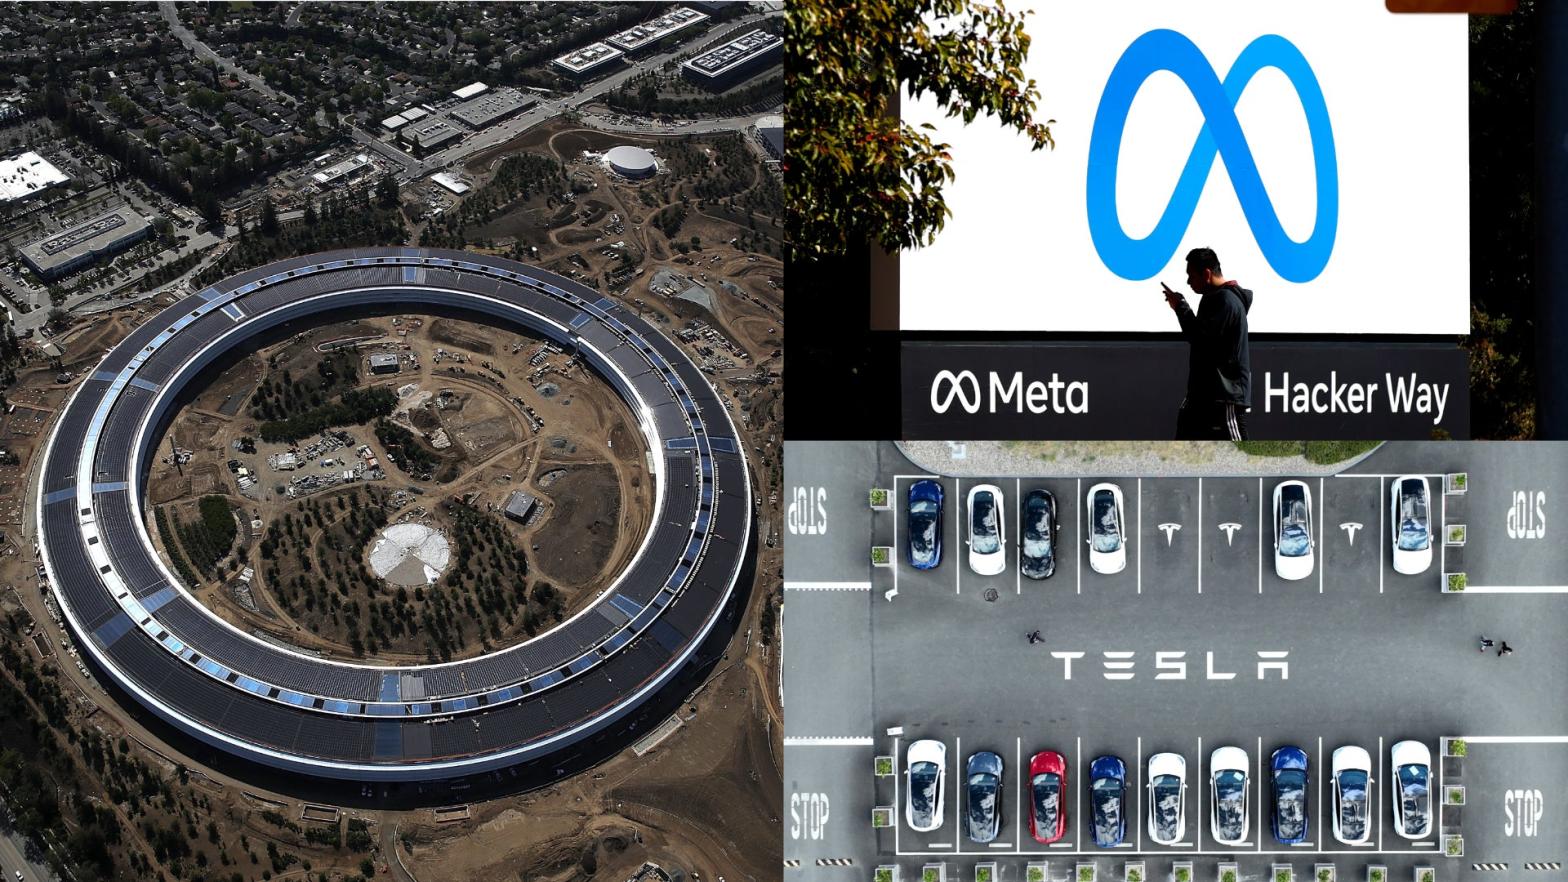 Gizmodo took a look at the salaries of some open positions at Apple, Meta, and Tesla in California. (Image: Apple Campus in Cupertino, Justin Sullivan, Getty Images,Image: Facebook HQ in Menlo Park, Justin Sullivan, Getty Images,Image: Tesla Factory in Fremont, Justin Sullivan, Getty Images)